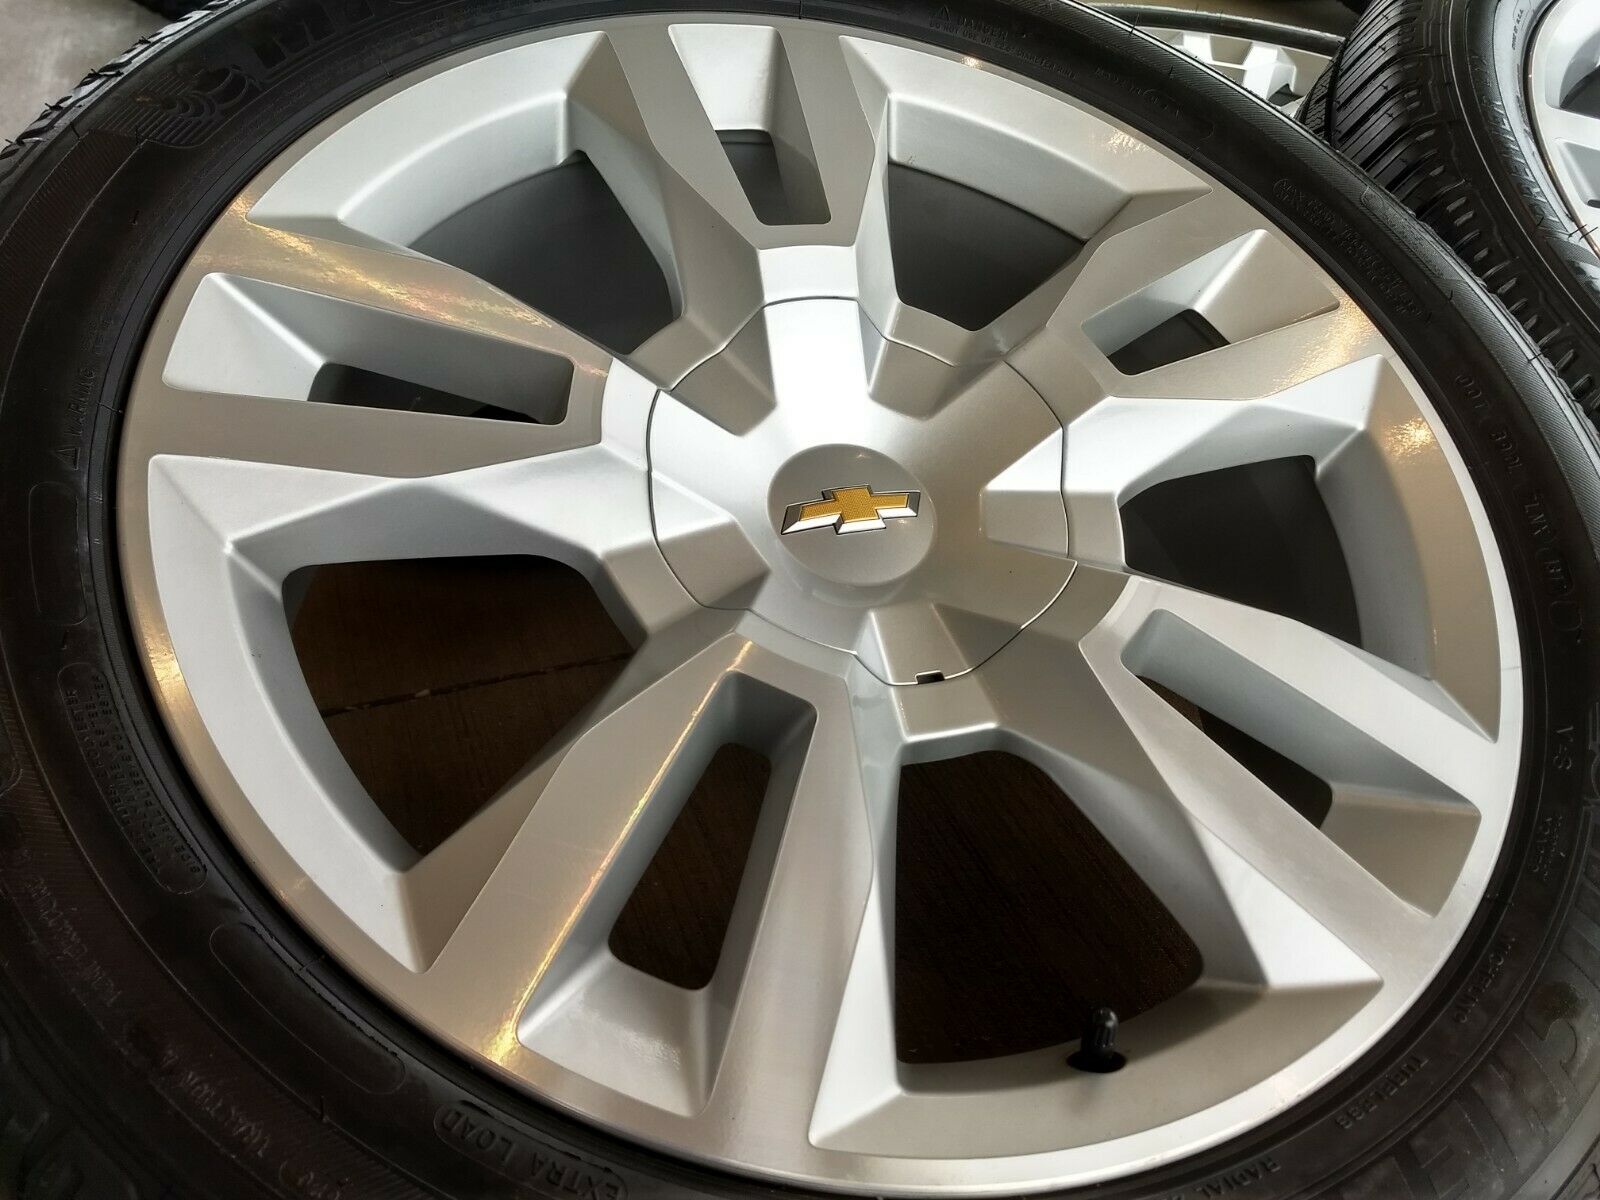 22" Chevy Tahoe Premier 2020 OEM Wheels | 05620 Chevy Tahoe 22-inch Factory Rims Tire Size